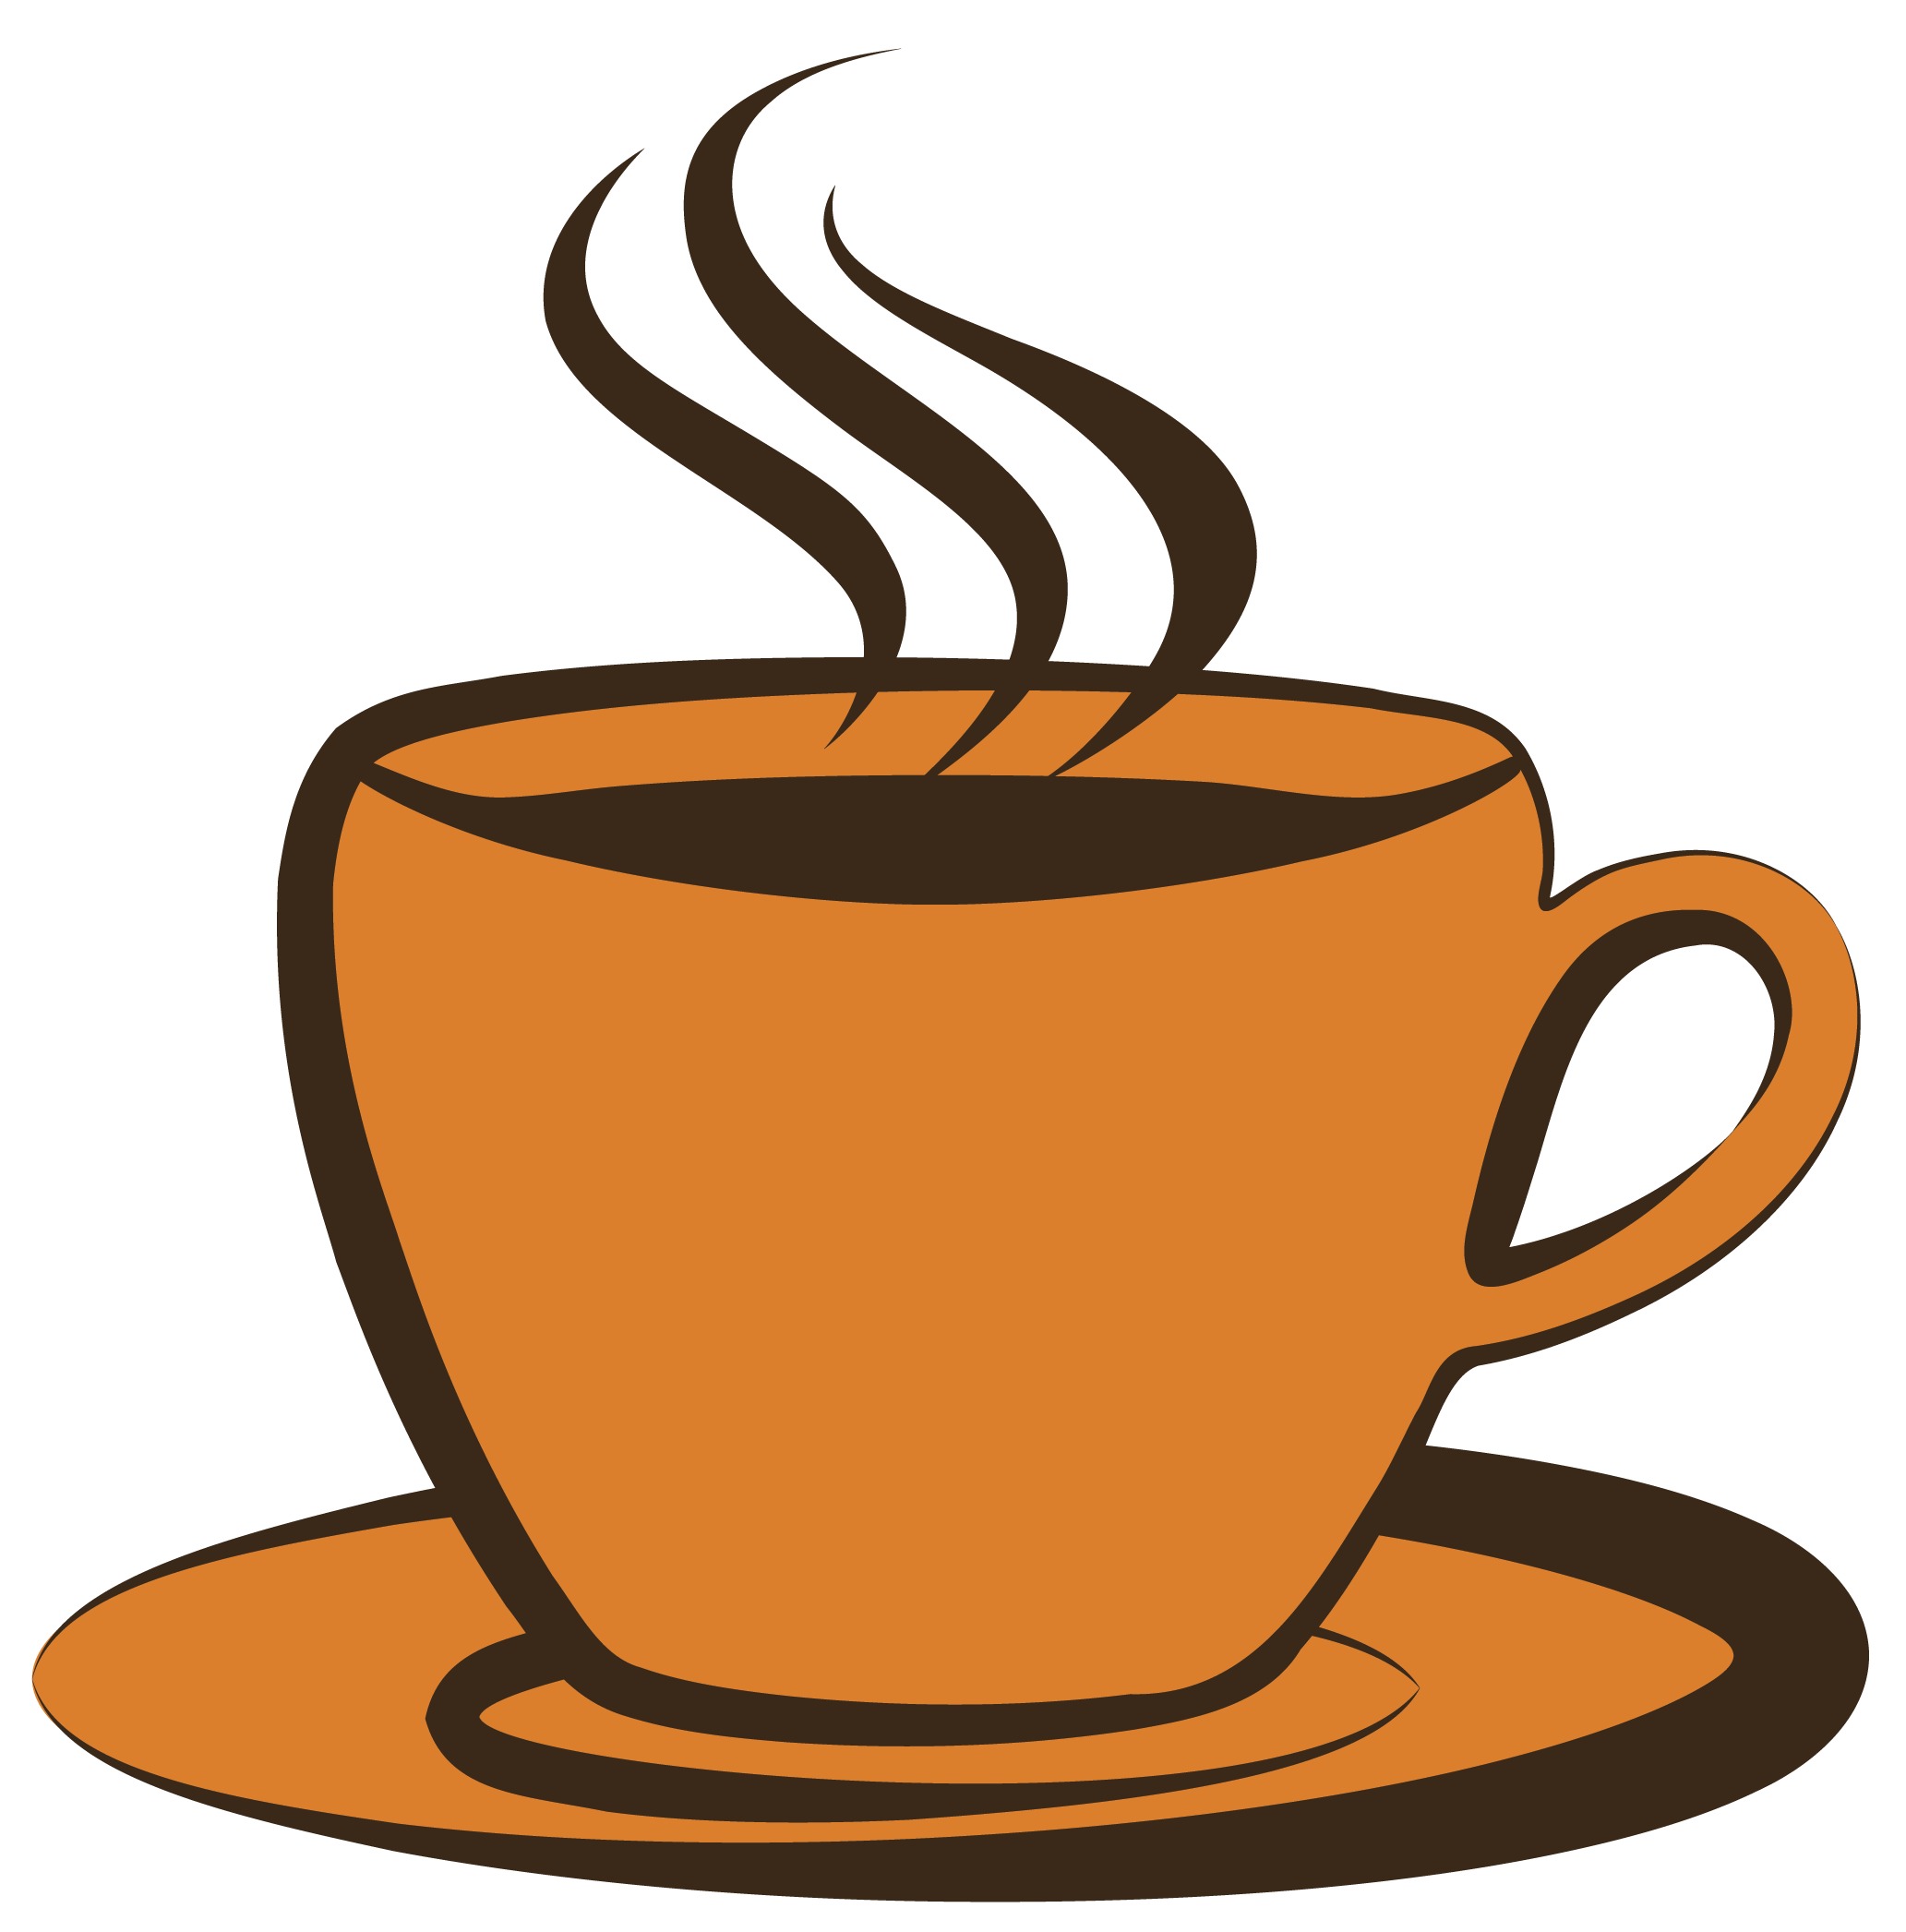 Coffee cup clip art free perfect cup of coffee clipart 3 